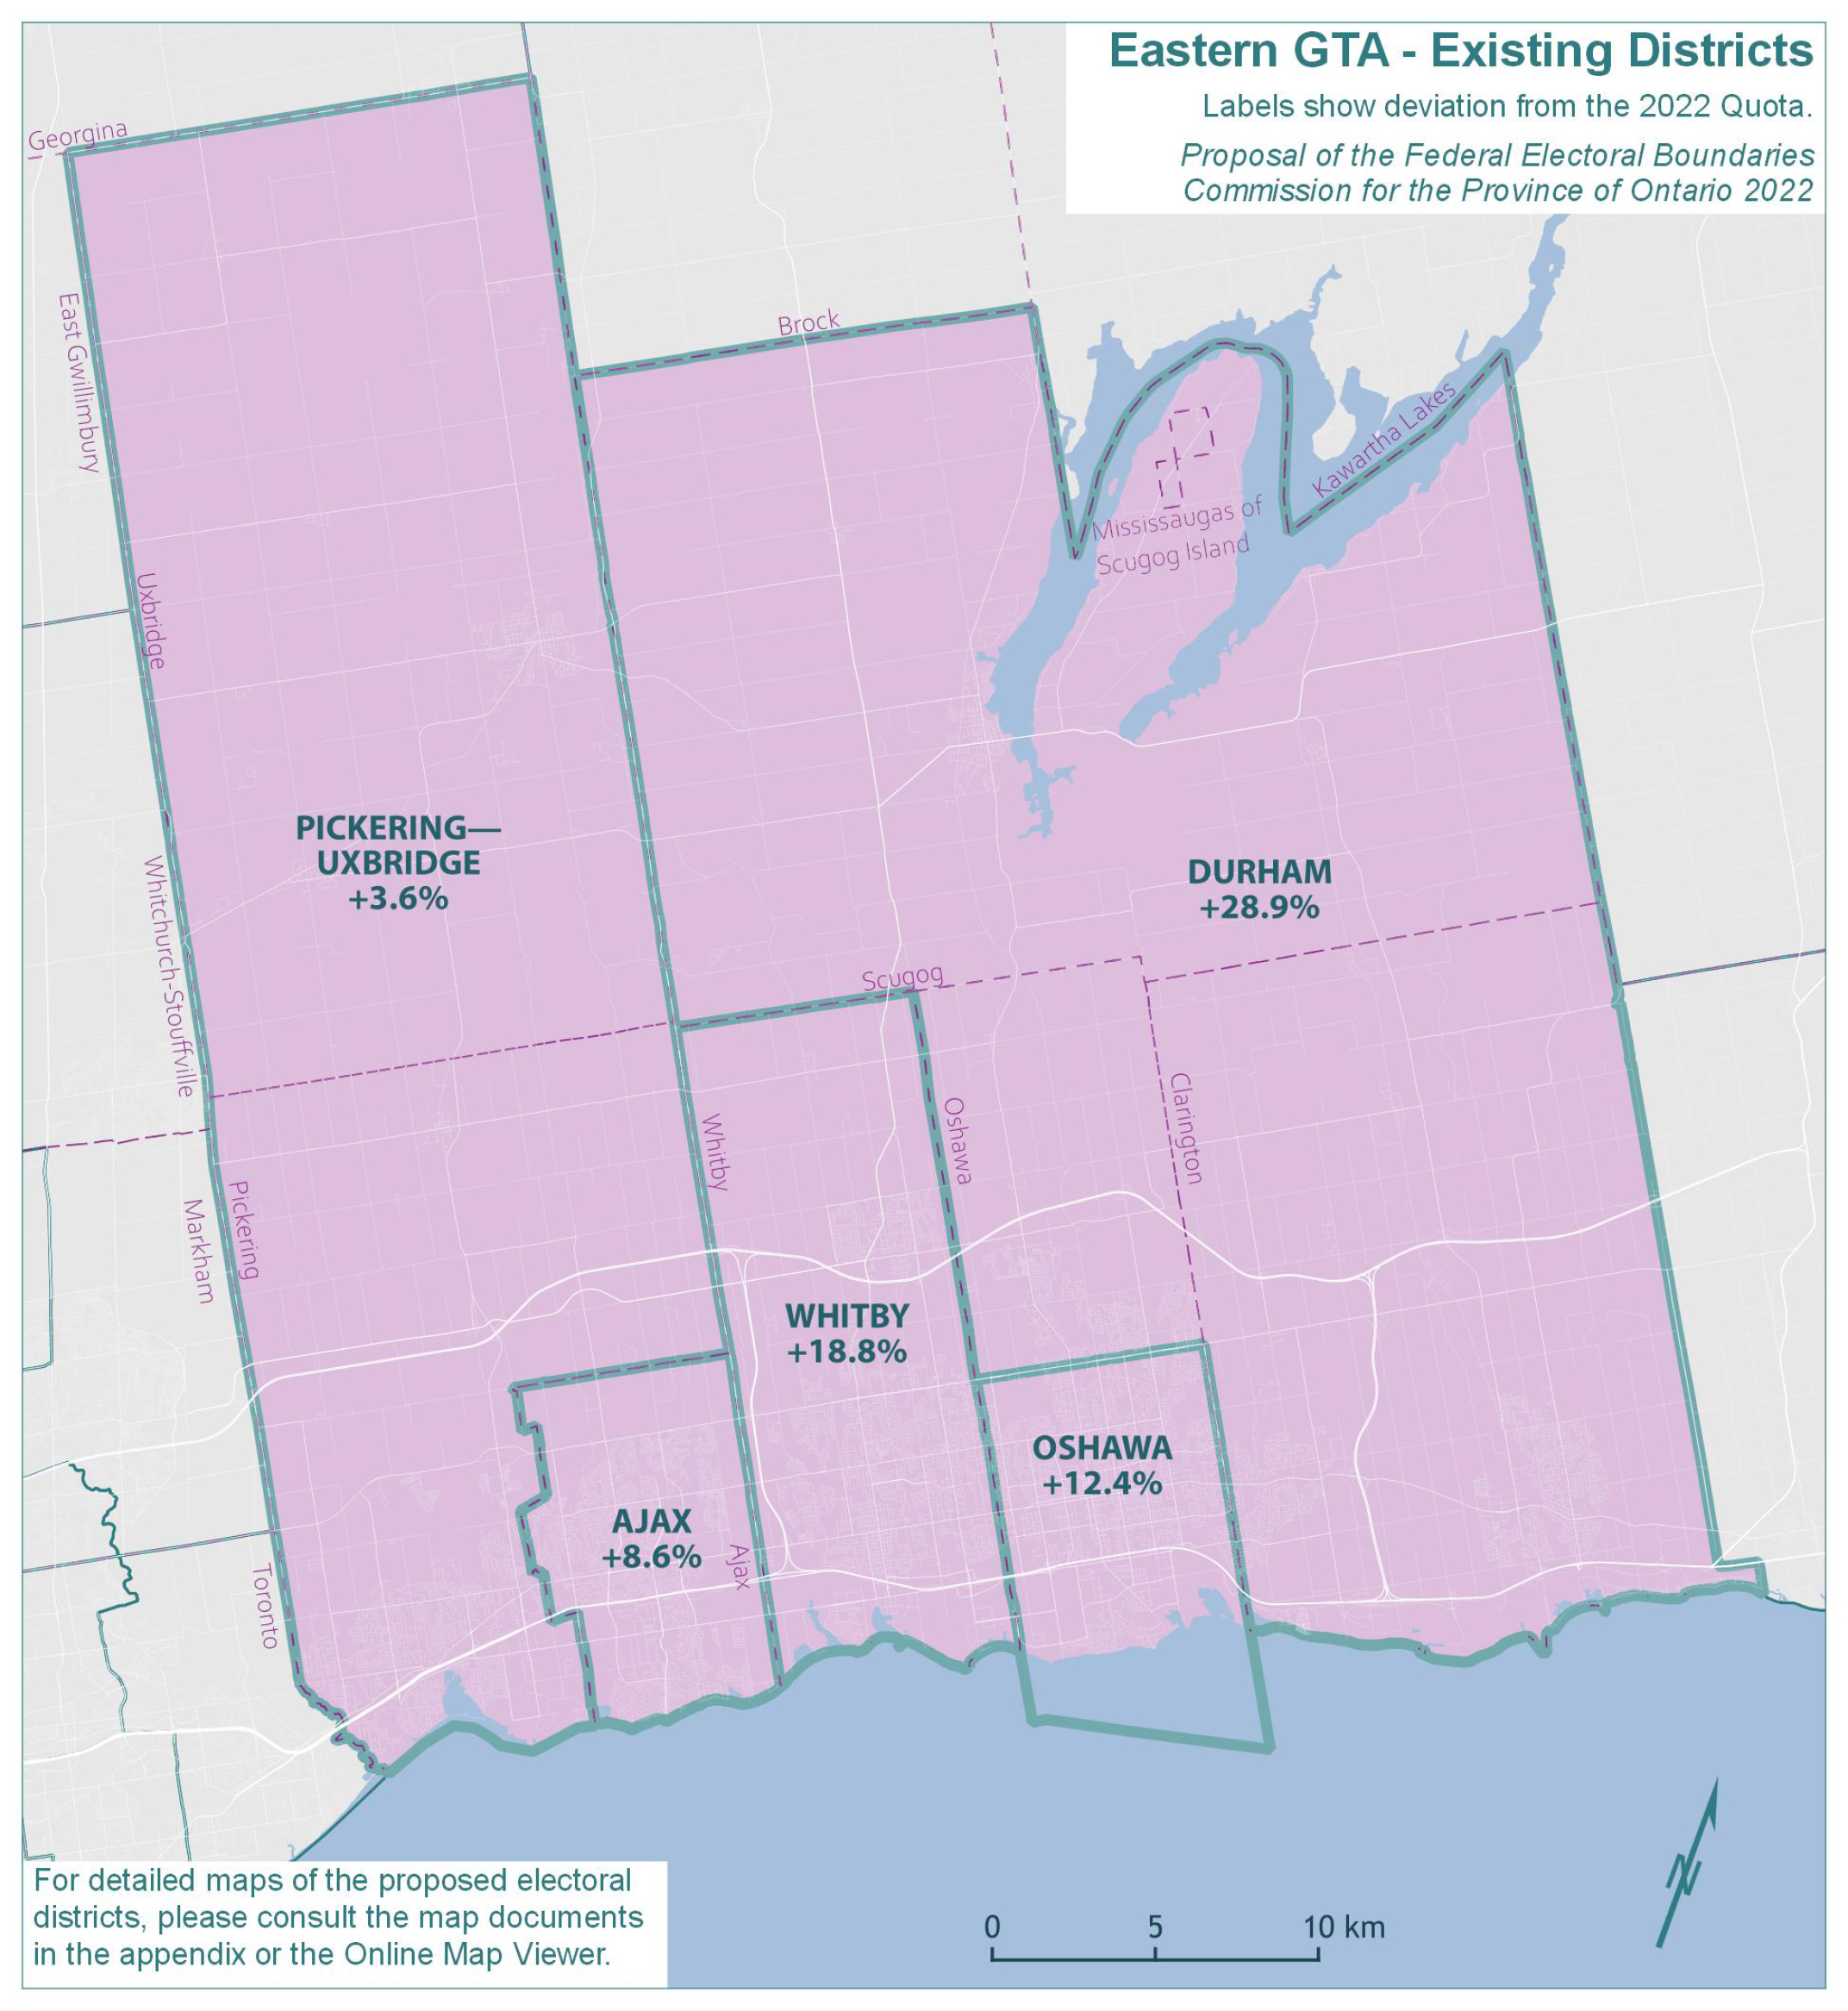 Eastern Greater Toronto Area - Existing Districts 